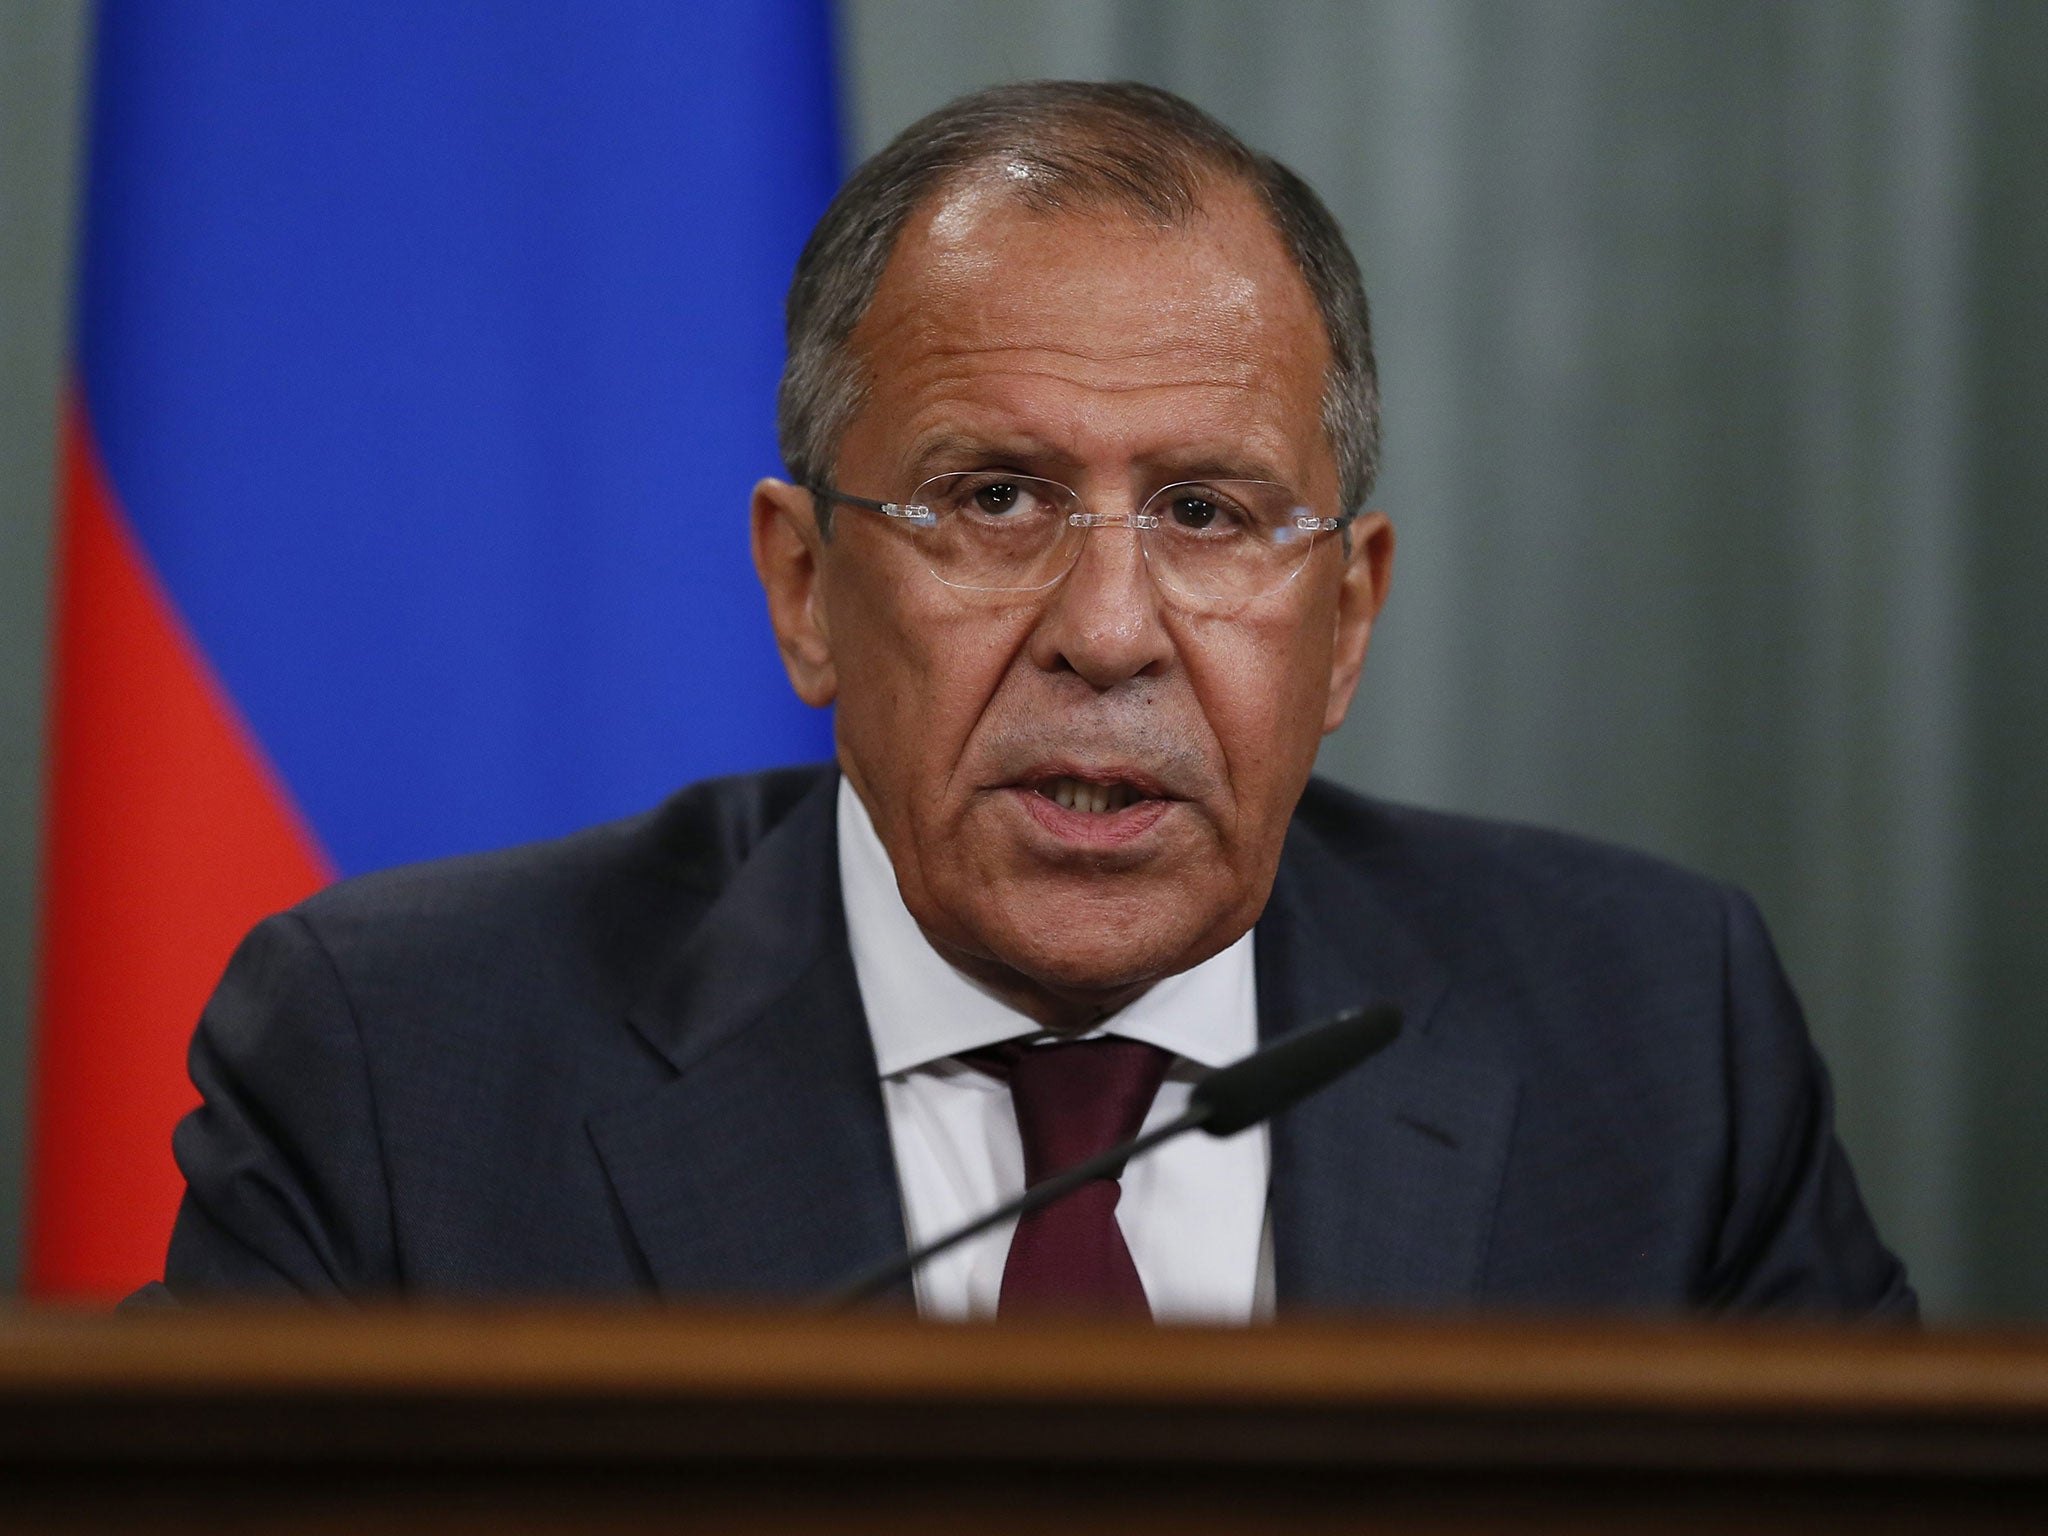 Foreign Minister Sergei Lavrov says Russia is acting legally